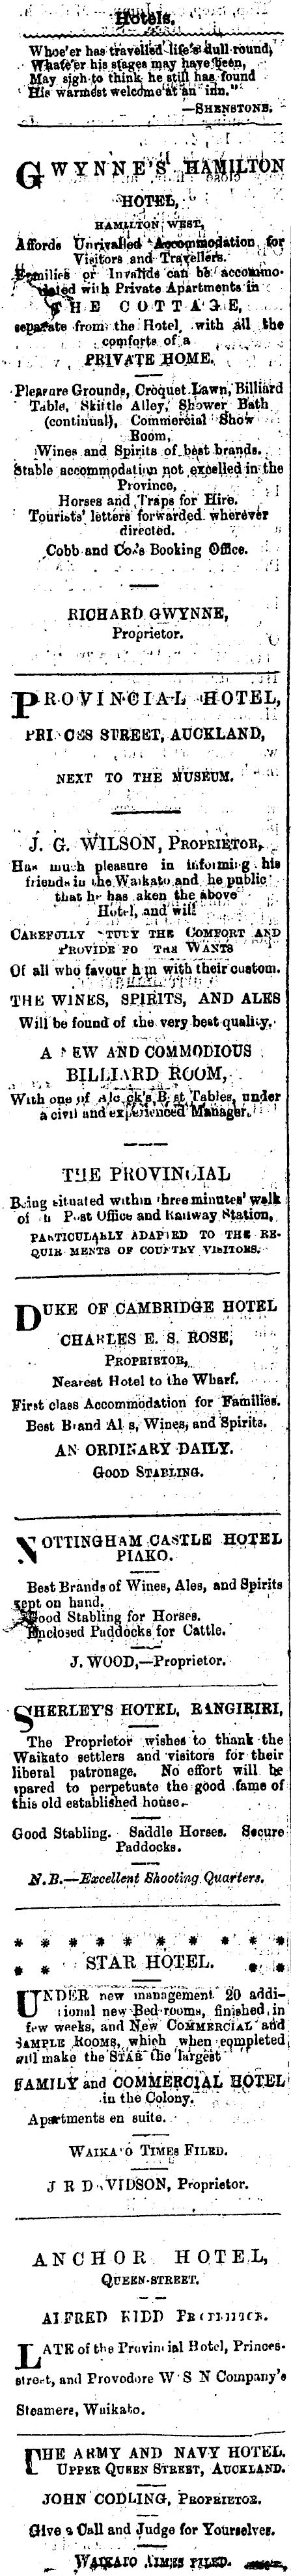 Papers Past Newspapers Waikato Times 29 December 1877 Page 1 Advertisements Column 1